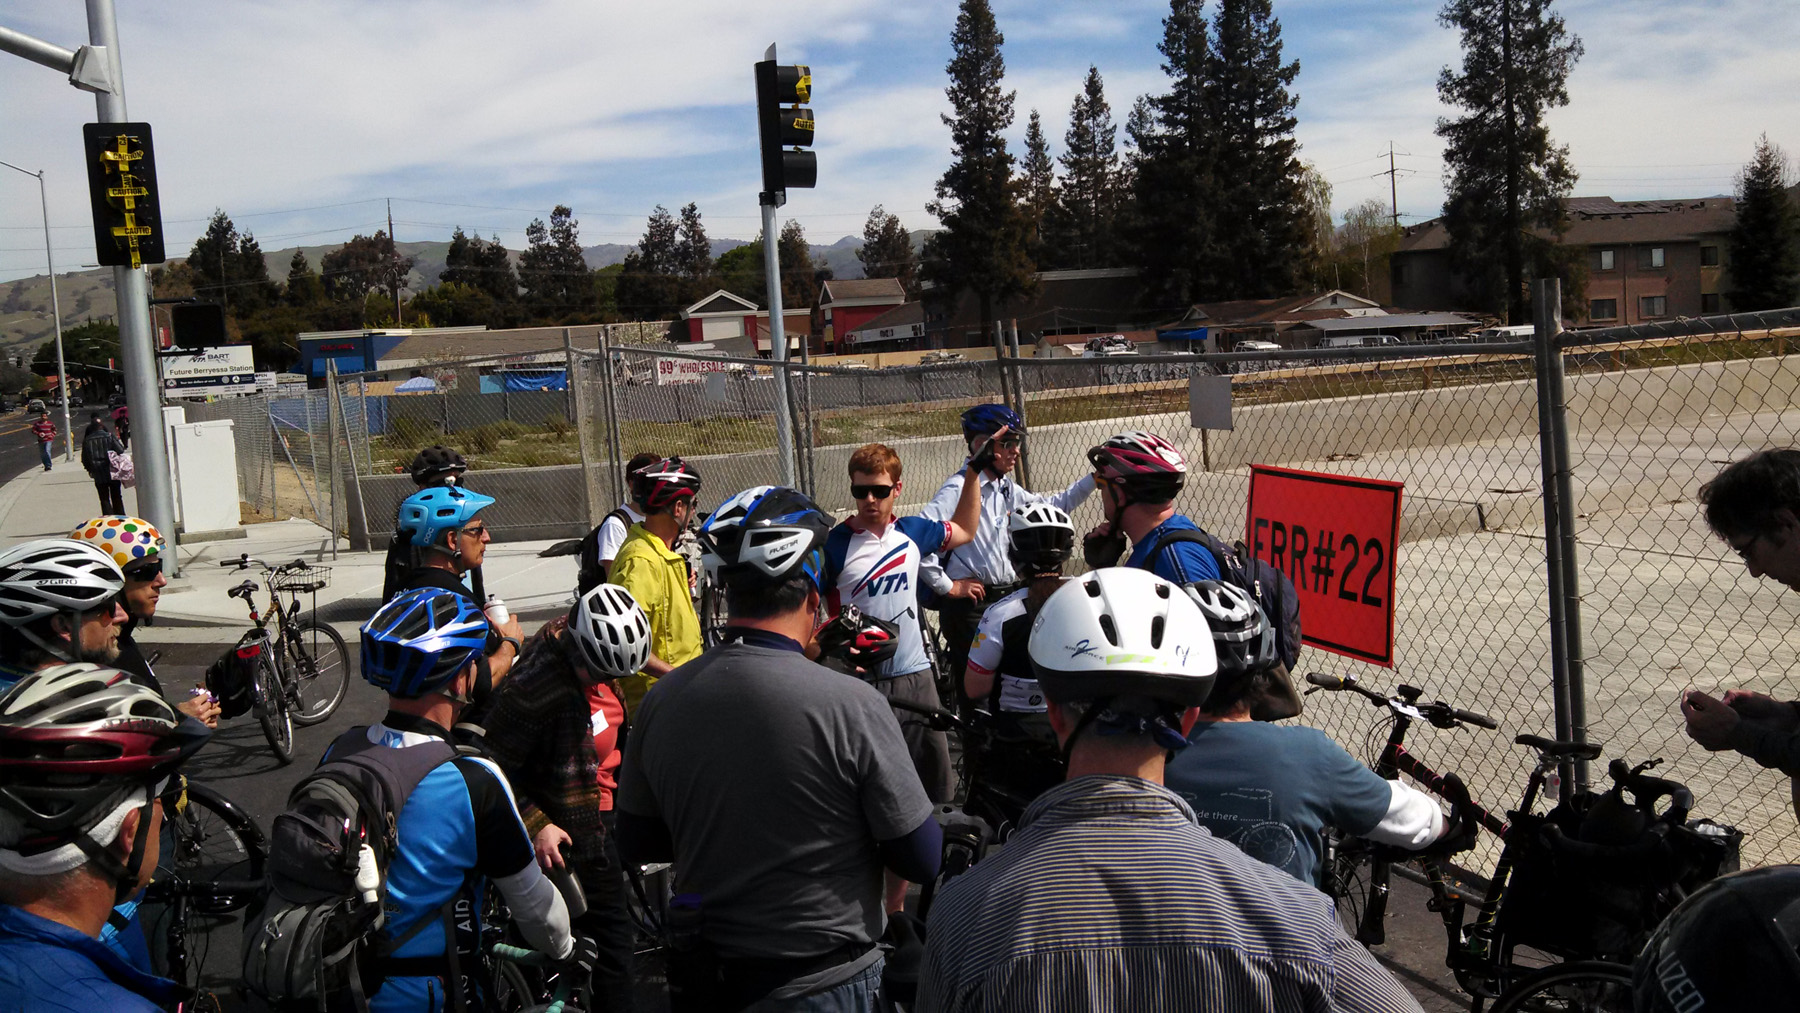 The Silicon Valley Bicycle Coalition discussing bike features at the Berryessa Station in 2014. Photo: SVBC